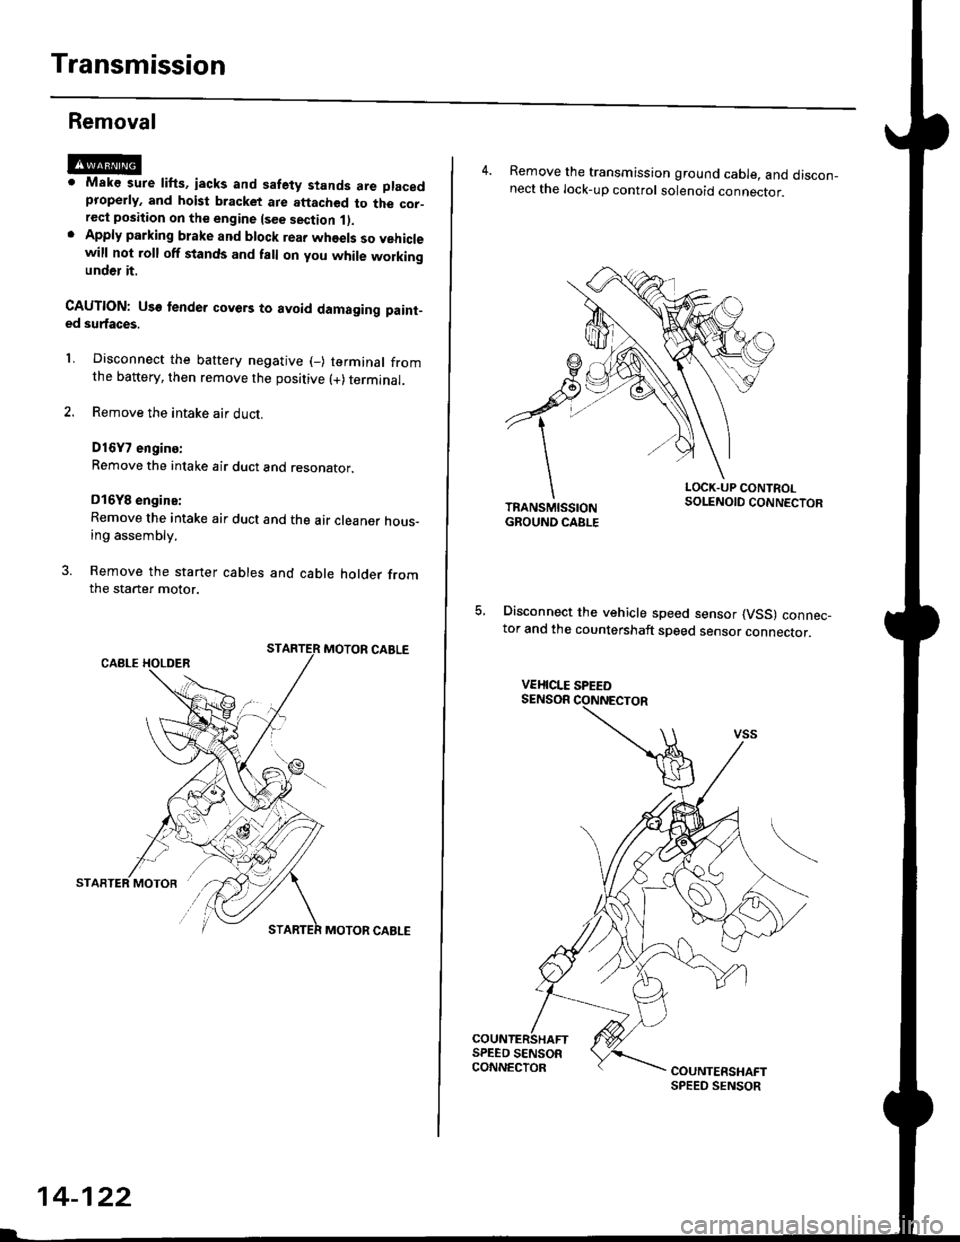 HONDA CIVIC 1996 6.G User Guide Transmission
Removal
@Maks sure lifts, iacks and safety stands are placedproperly, and hoist bracket ate aftached to the cor_rec{ position on the engine lsee section 1).Apply parking brake and block r